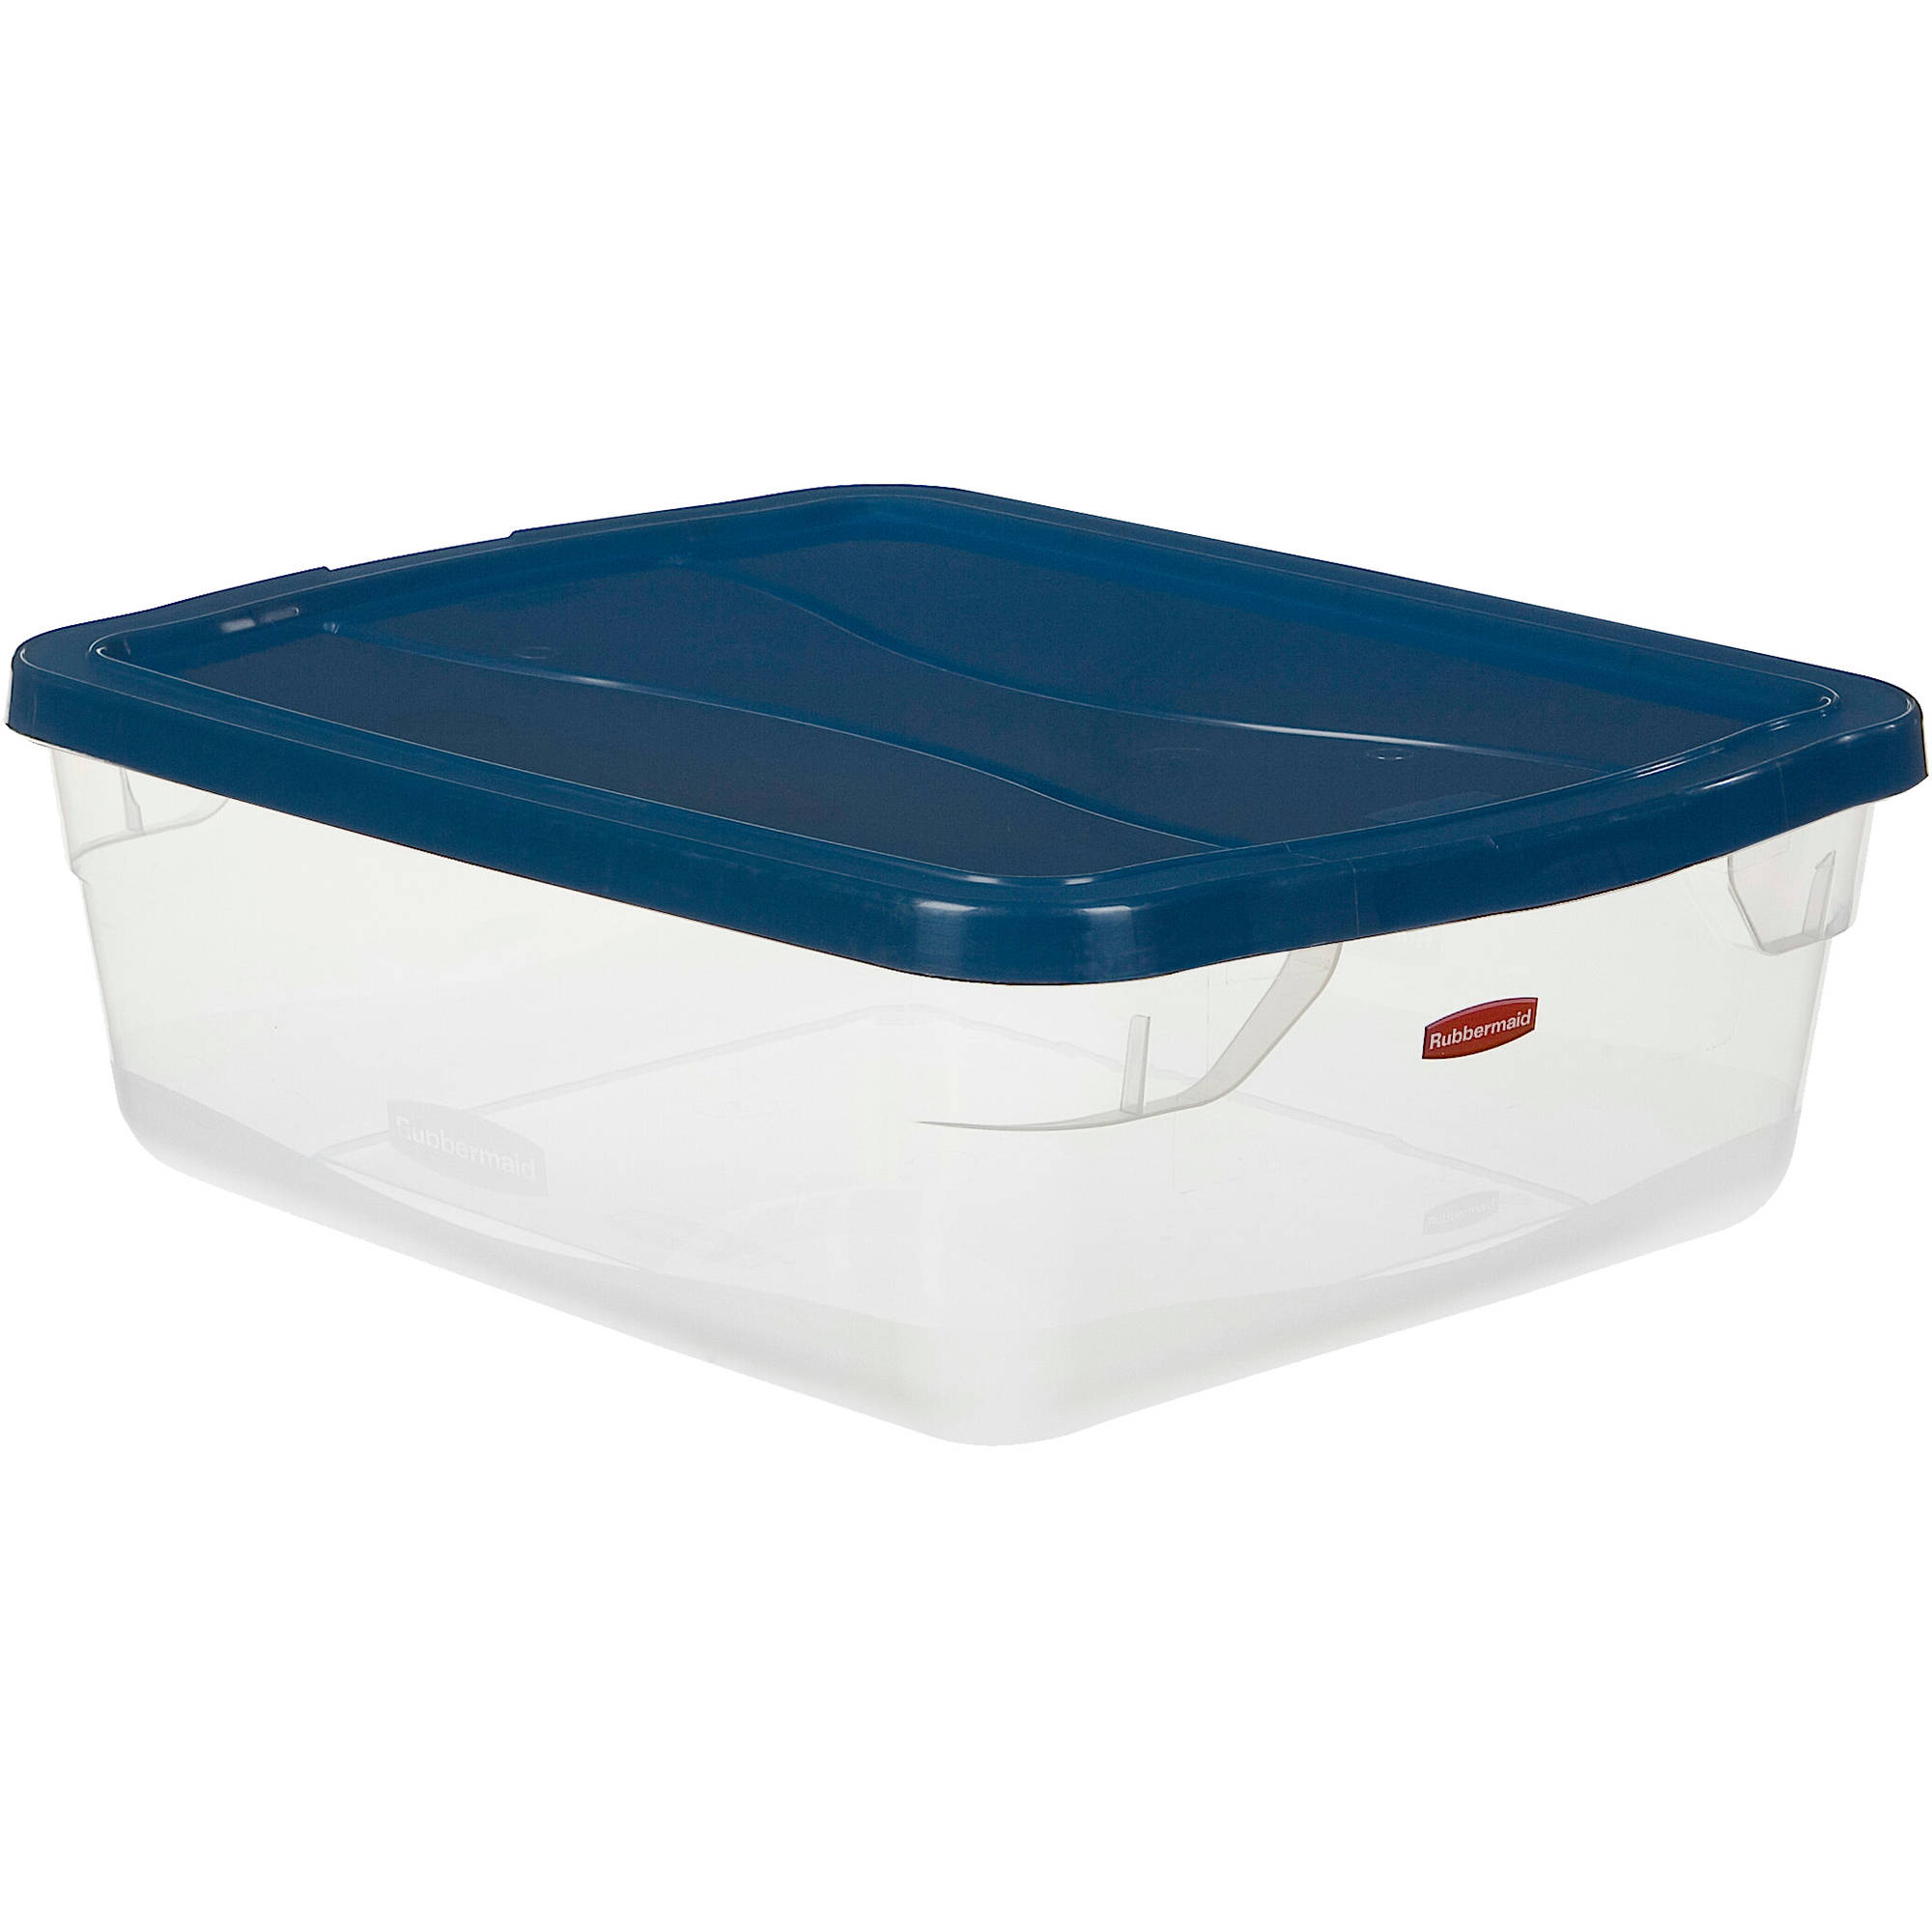 Rubbermaid Clever Store Clears Storage Container, 15 qt, Clear with Blue Lid - image 1 of 2